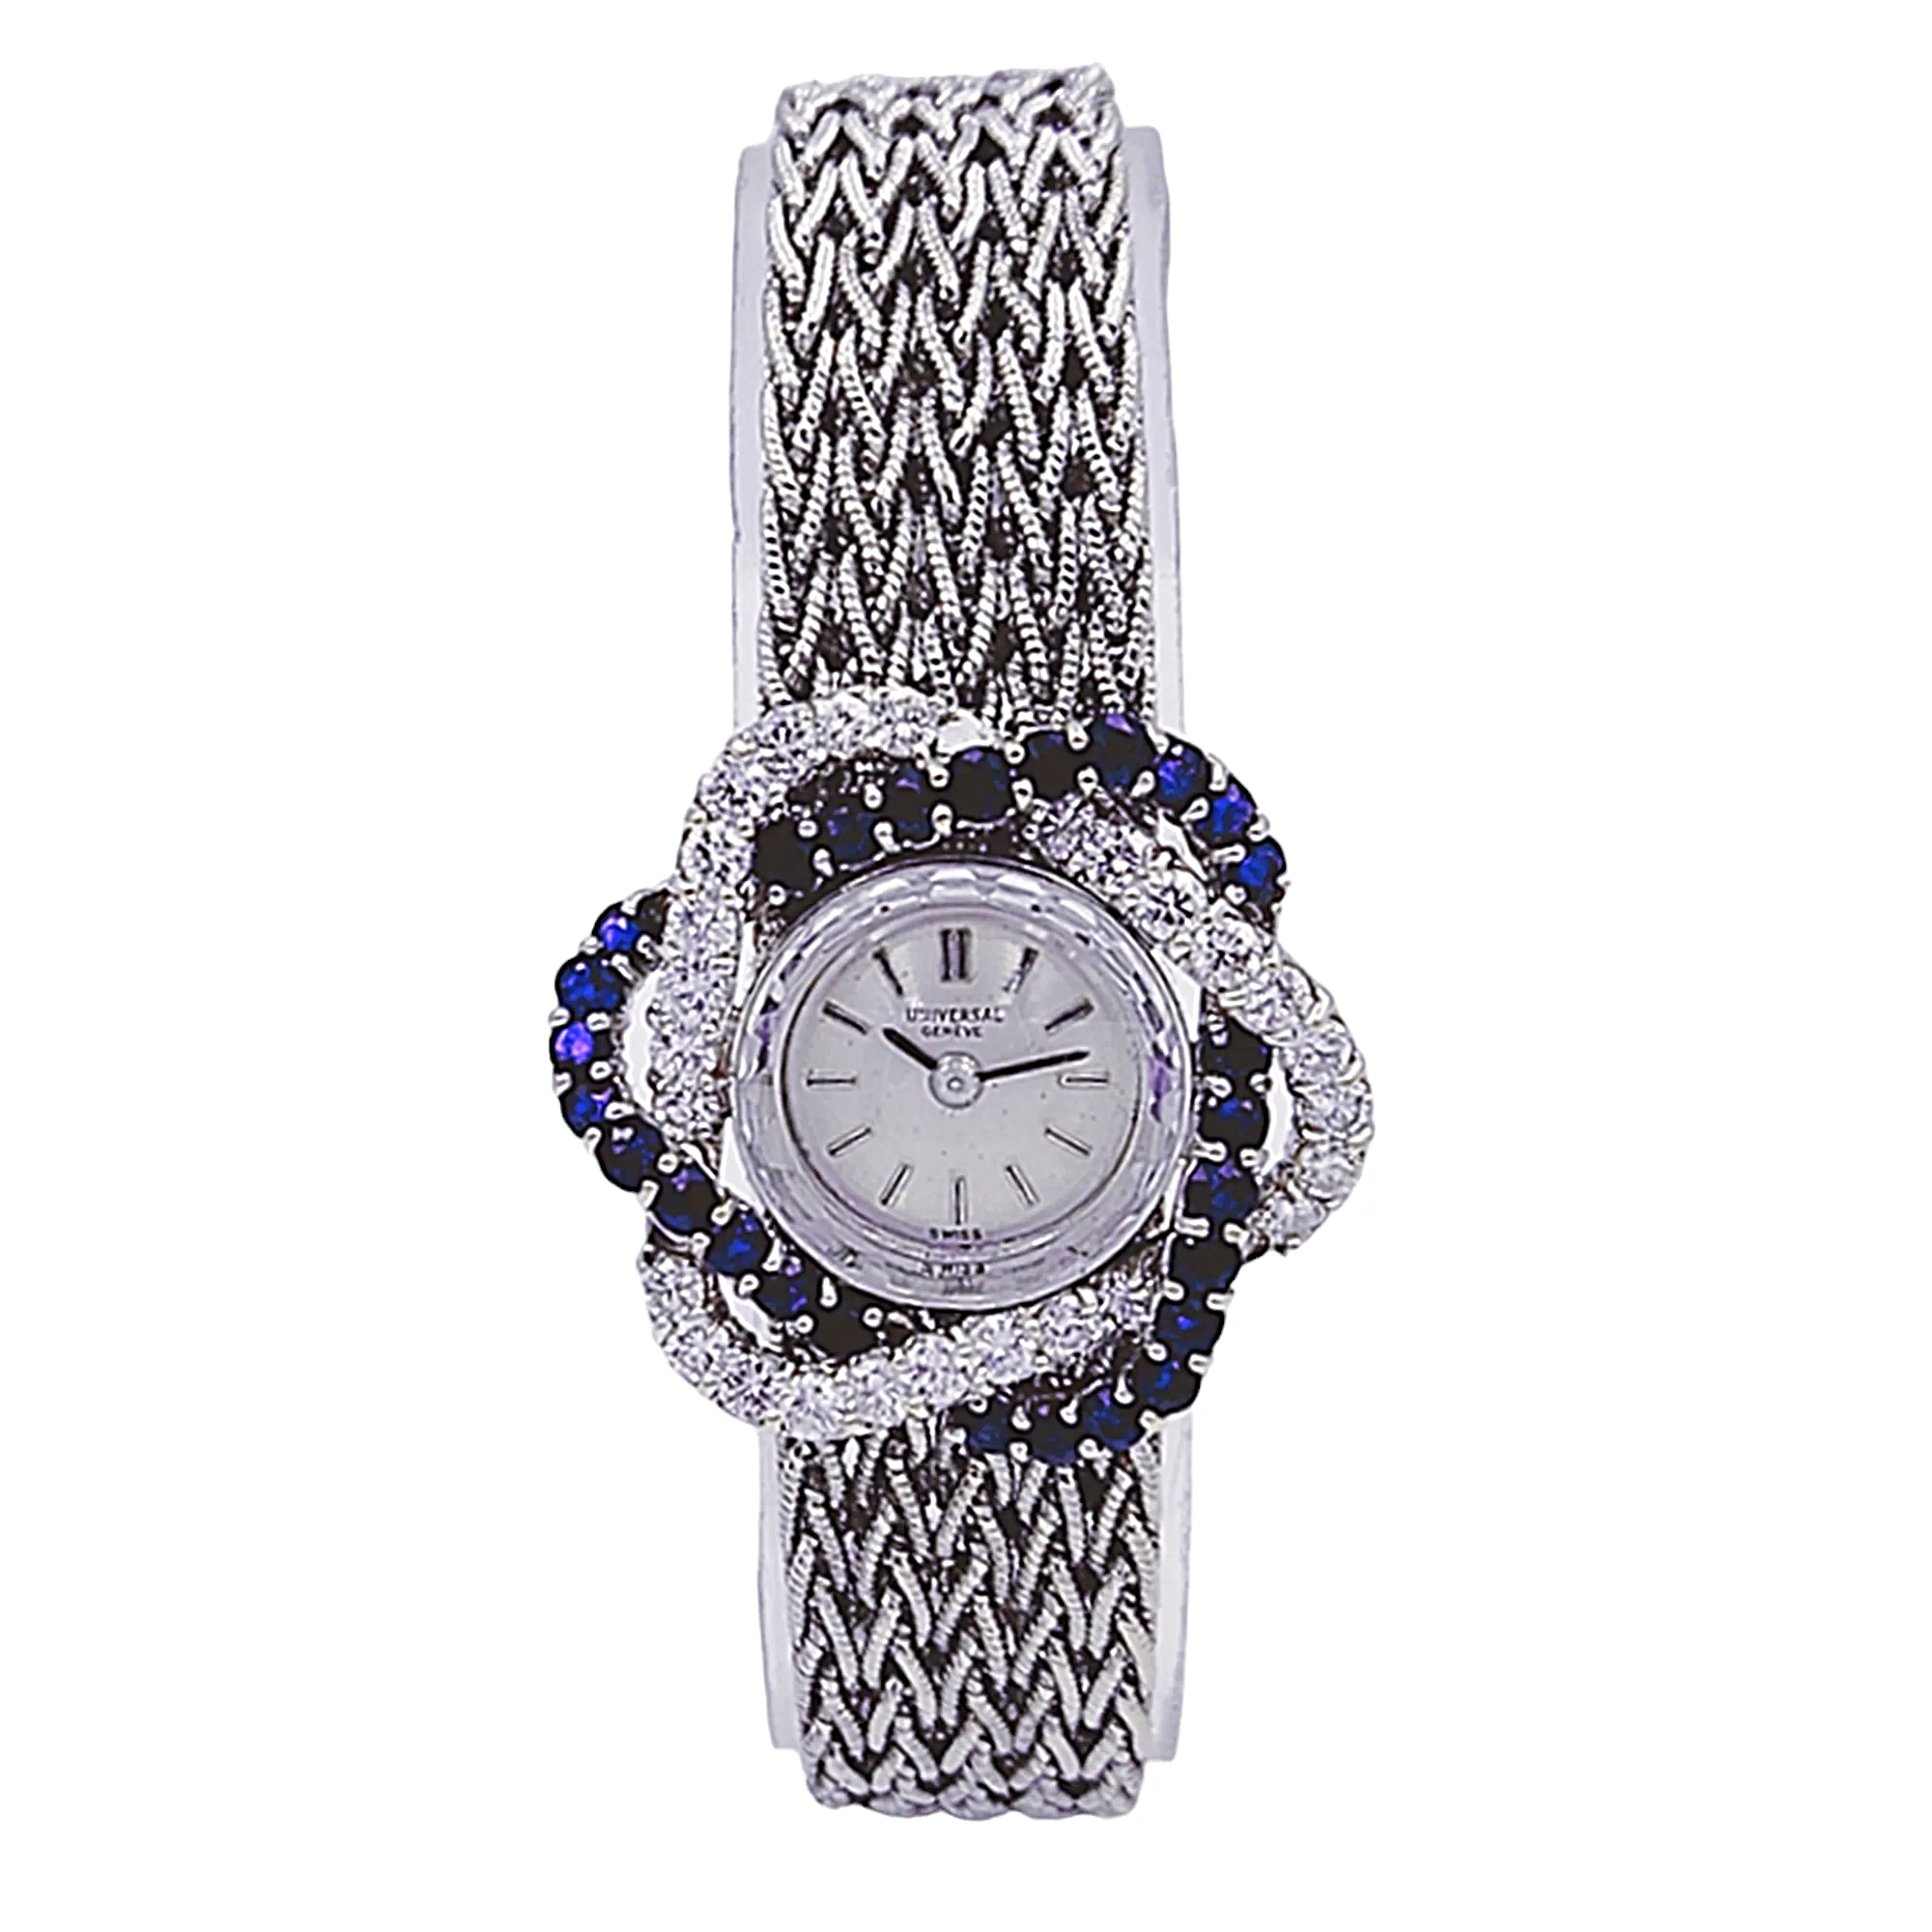 Ladies Universal Genève Vintage 22mm Watch with Blue Saphire / Natural Diamonds in 18K White Gold Band. (Pre-Owned)